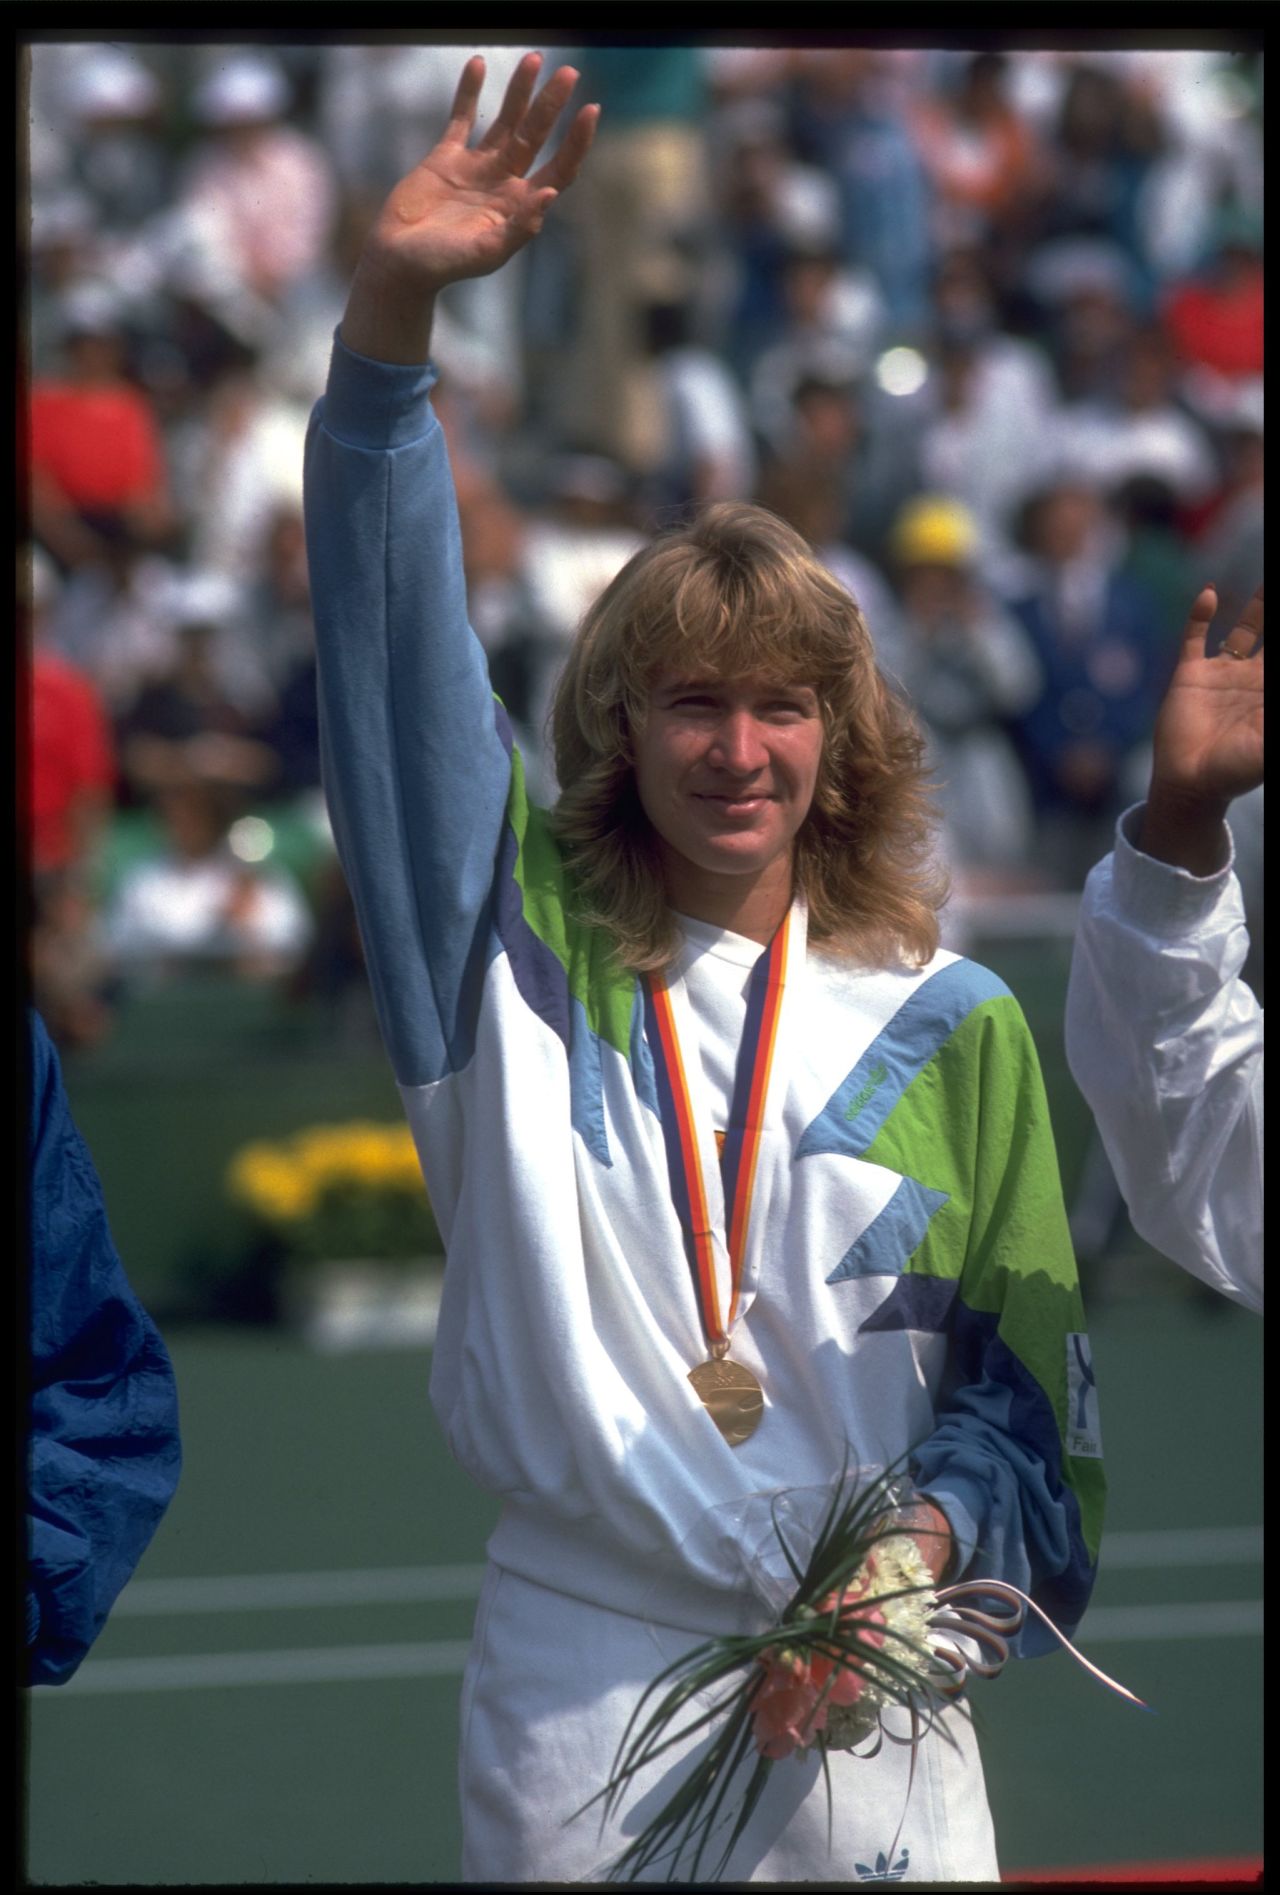 Graf's gold medal in Seoul in 1988 followed her victories in all four grand slams that year, the so-called "Golden Slam."